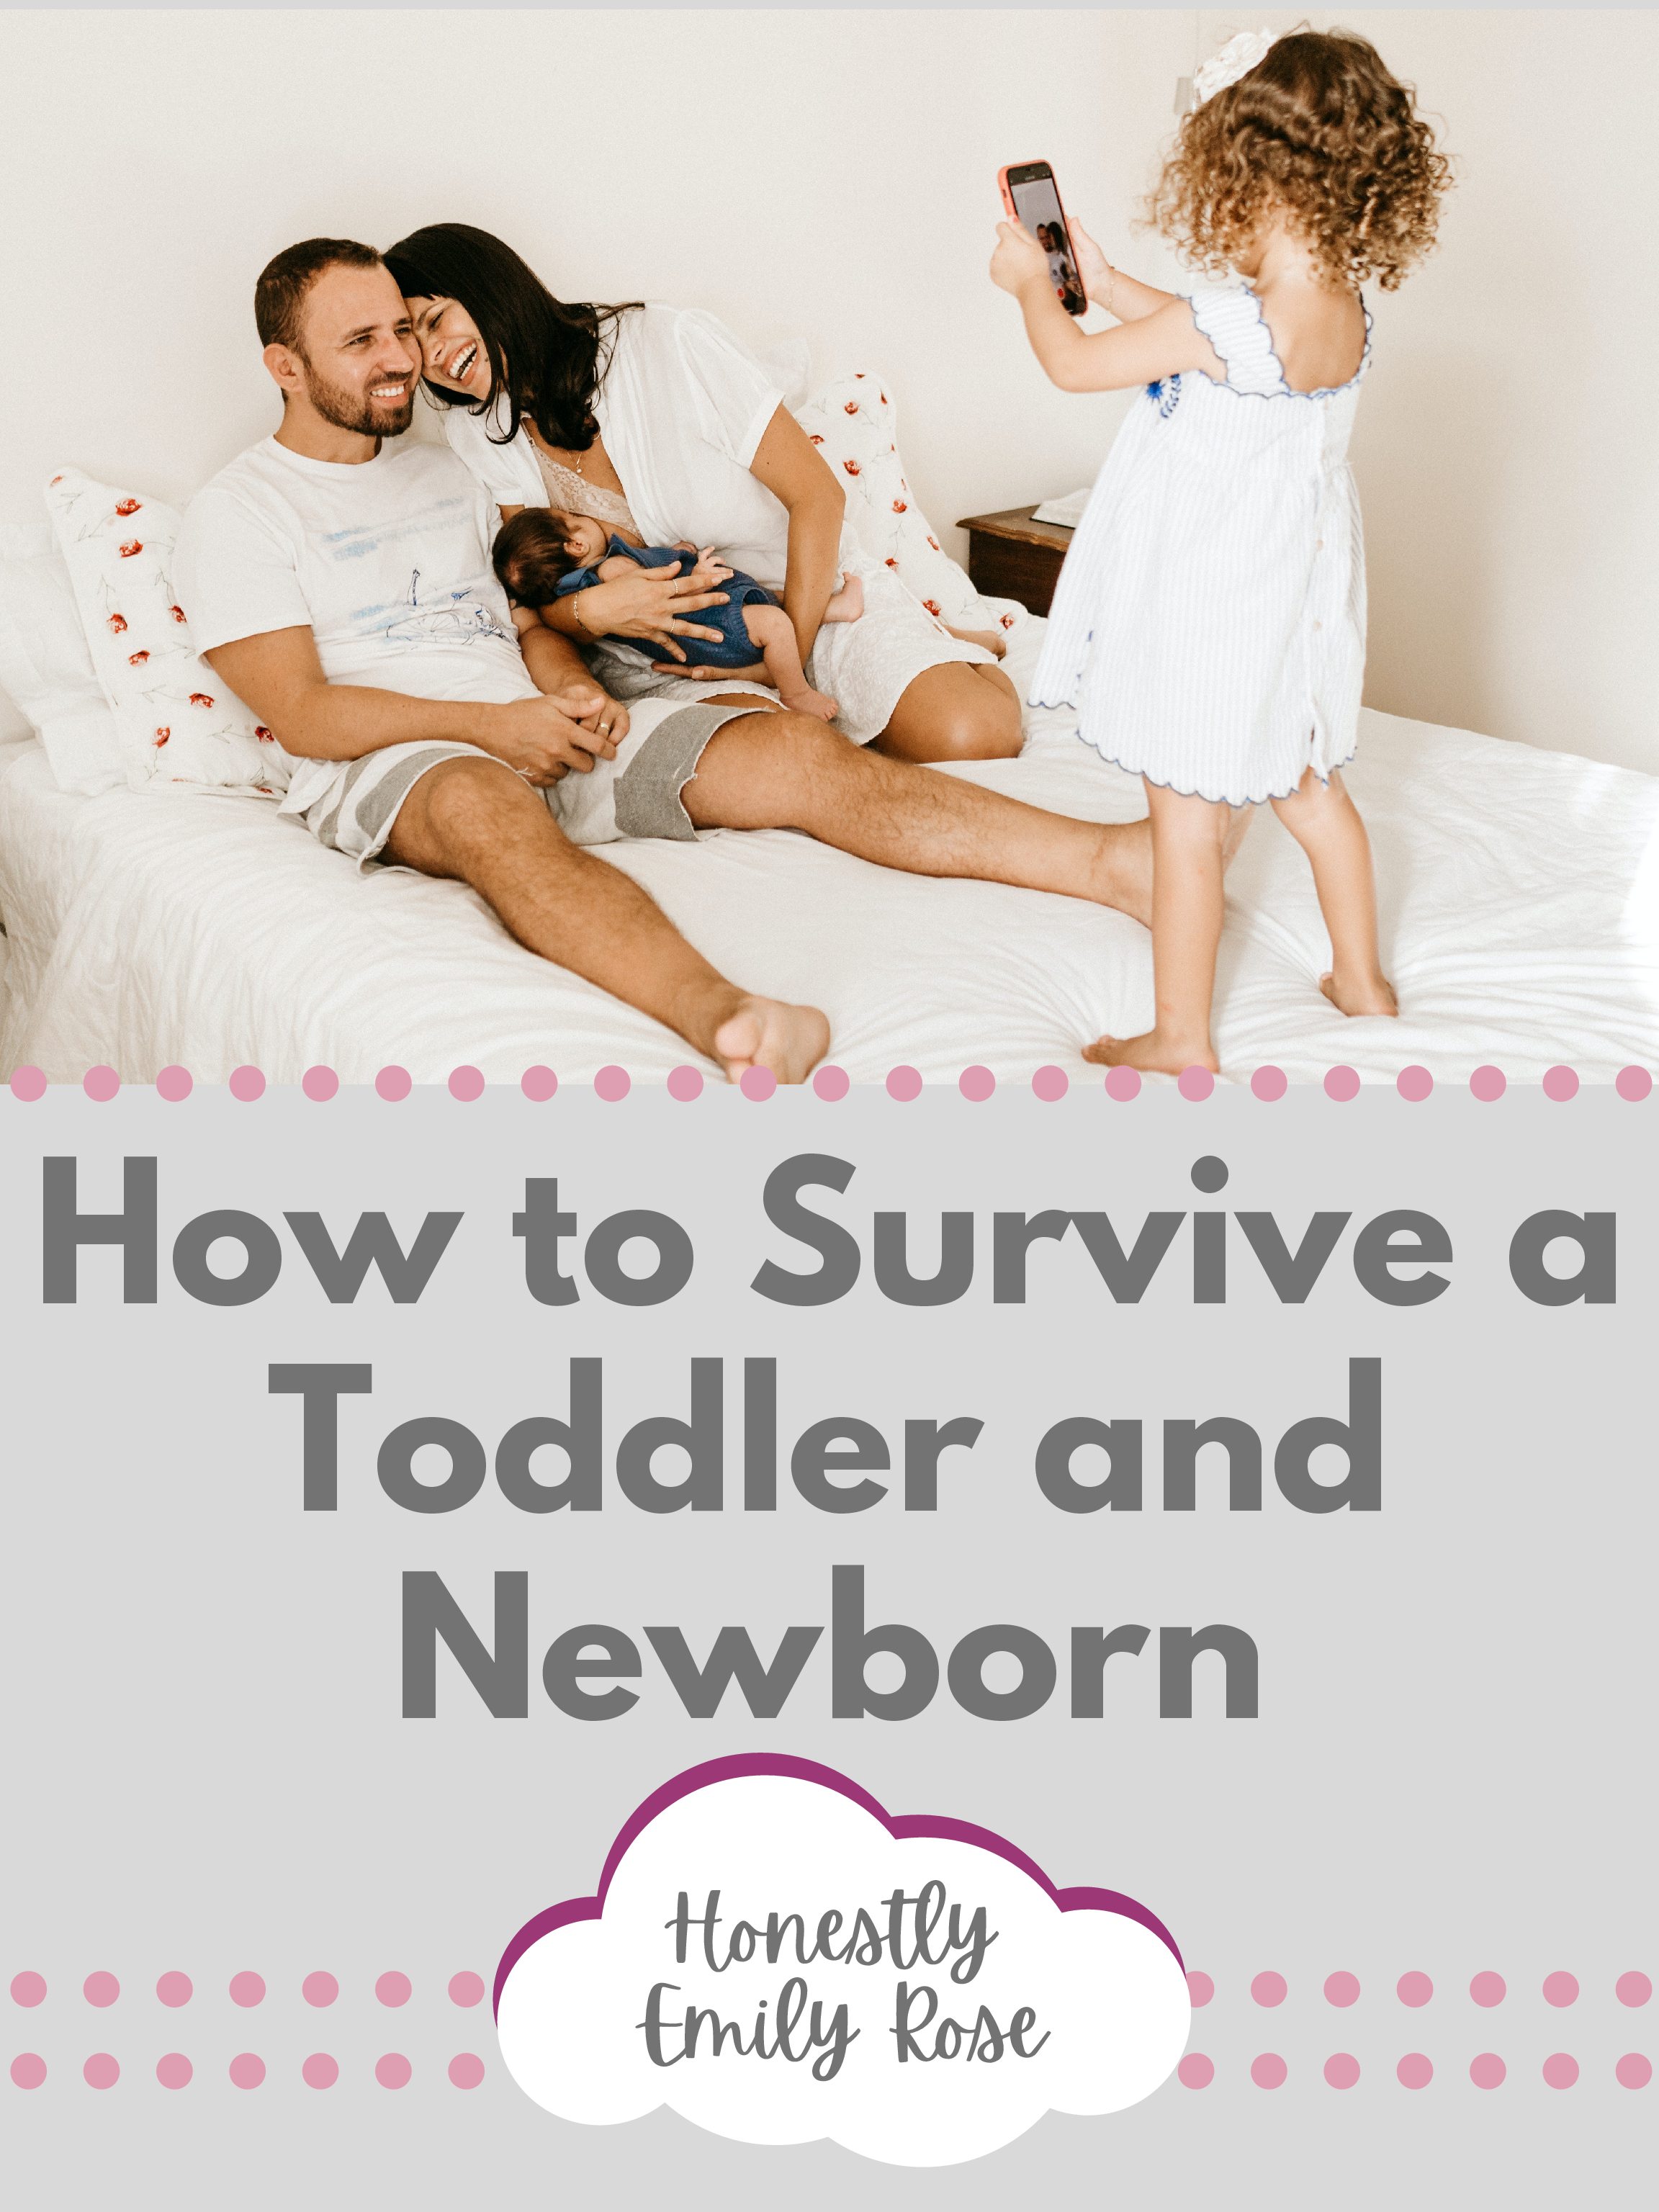 How to Survive a Toddler and Newborn: The Most Challenging, Fulfilling Time Of Your Life